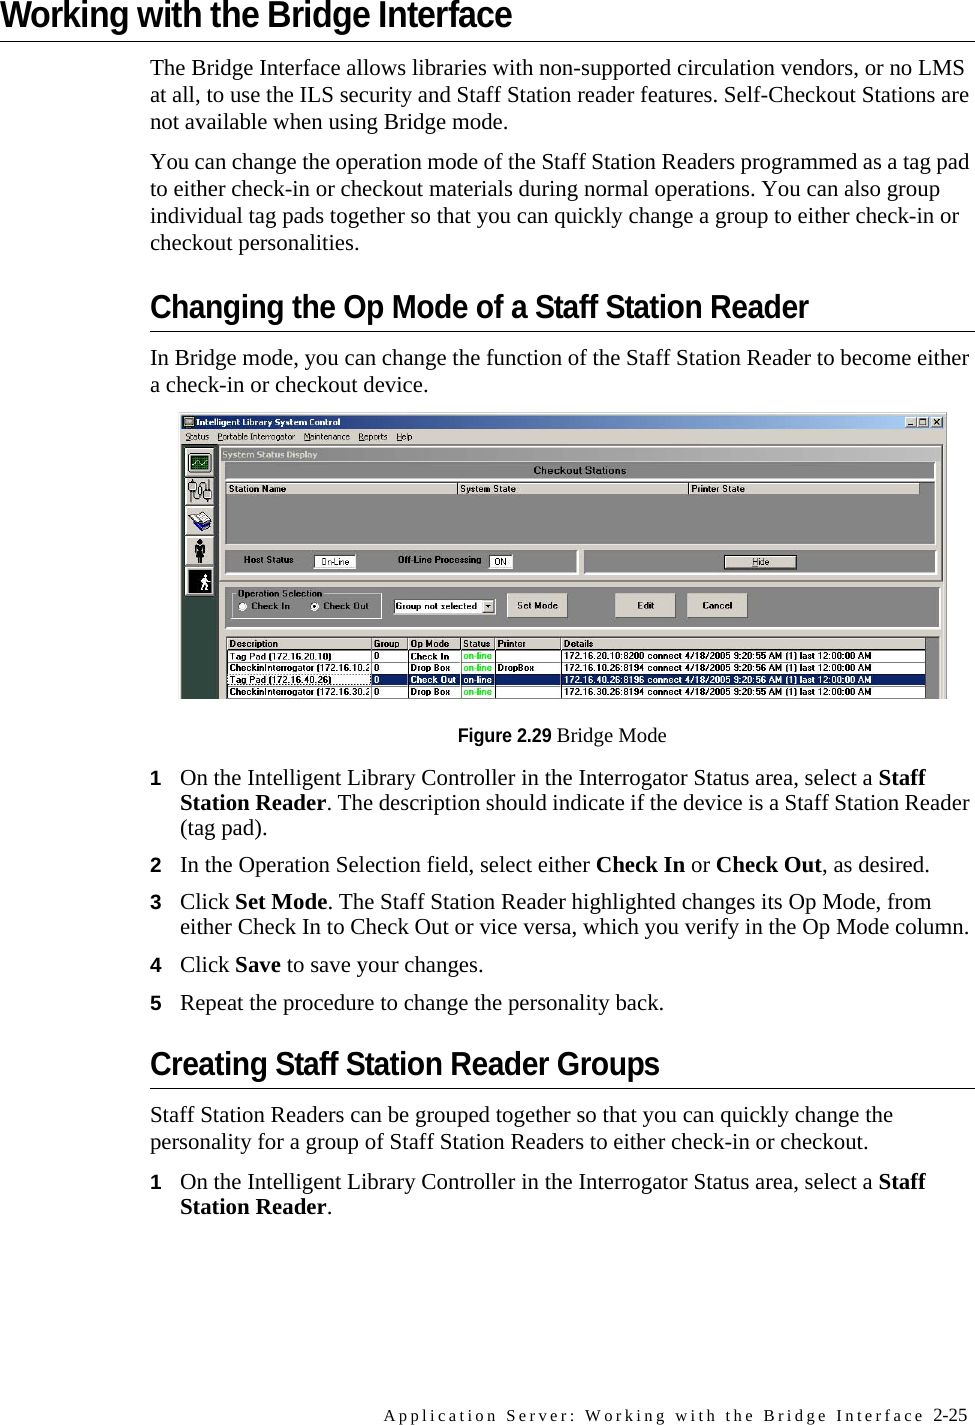 Application Server: Working with the Bridge Interface 2-25Working with the Bridge InterfaceThe Bridge Interface allows libraries with non-supported circulation vendors, or no LMS at all, to use the ILS security and Staff Station reader features. Self-Checkout Stations are not available when using Bridge mode.You can change the operation mode of the Staff Station Readers programmed as a tag pad to either check-in or checkout materials during normal operations. You can also group individual tag pads together so that you can quickly change a group to either check-in or checkout personalities.Changing the Op Mode of a Staff Station ReaderIn Bridge mode, you can change the function of the Staff Station Reader to become either a check-in or checkout device.Figure 2.29 Bridge Mode1On the Intelligent Library Controller in the Interrogator Status area, select a Staff Station Reader. The description should indicate if the device is a Staff Station Reader (tag pad).2In the Operation Selection field, select either Check In or Check Out, as desired.3Click Set Mode. The Staff Station Reader highlighted changes its Op Mode, from either Check In to Check Out or vice versa, which you verify in the Op Mode column.4Click Save to save your changes.5Repeat the procedure to change the personality back.Creating Staff Station Reader GroupsStaff Station Readers can be grouped together so that you can quickly change the personality for a group of Staff Station Readers to either check-in or checkout.1On the Intelligent Library Controller in the Interrogator Status area, select a Staff Station Reader.